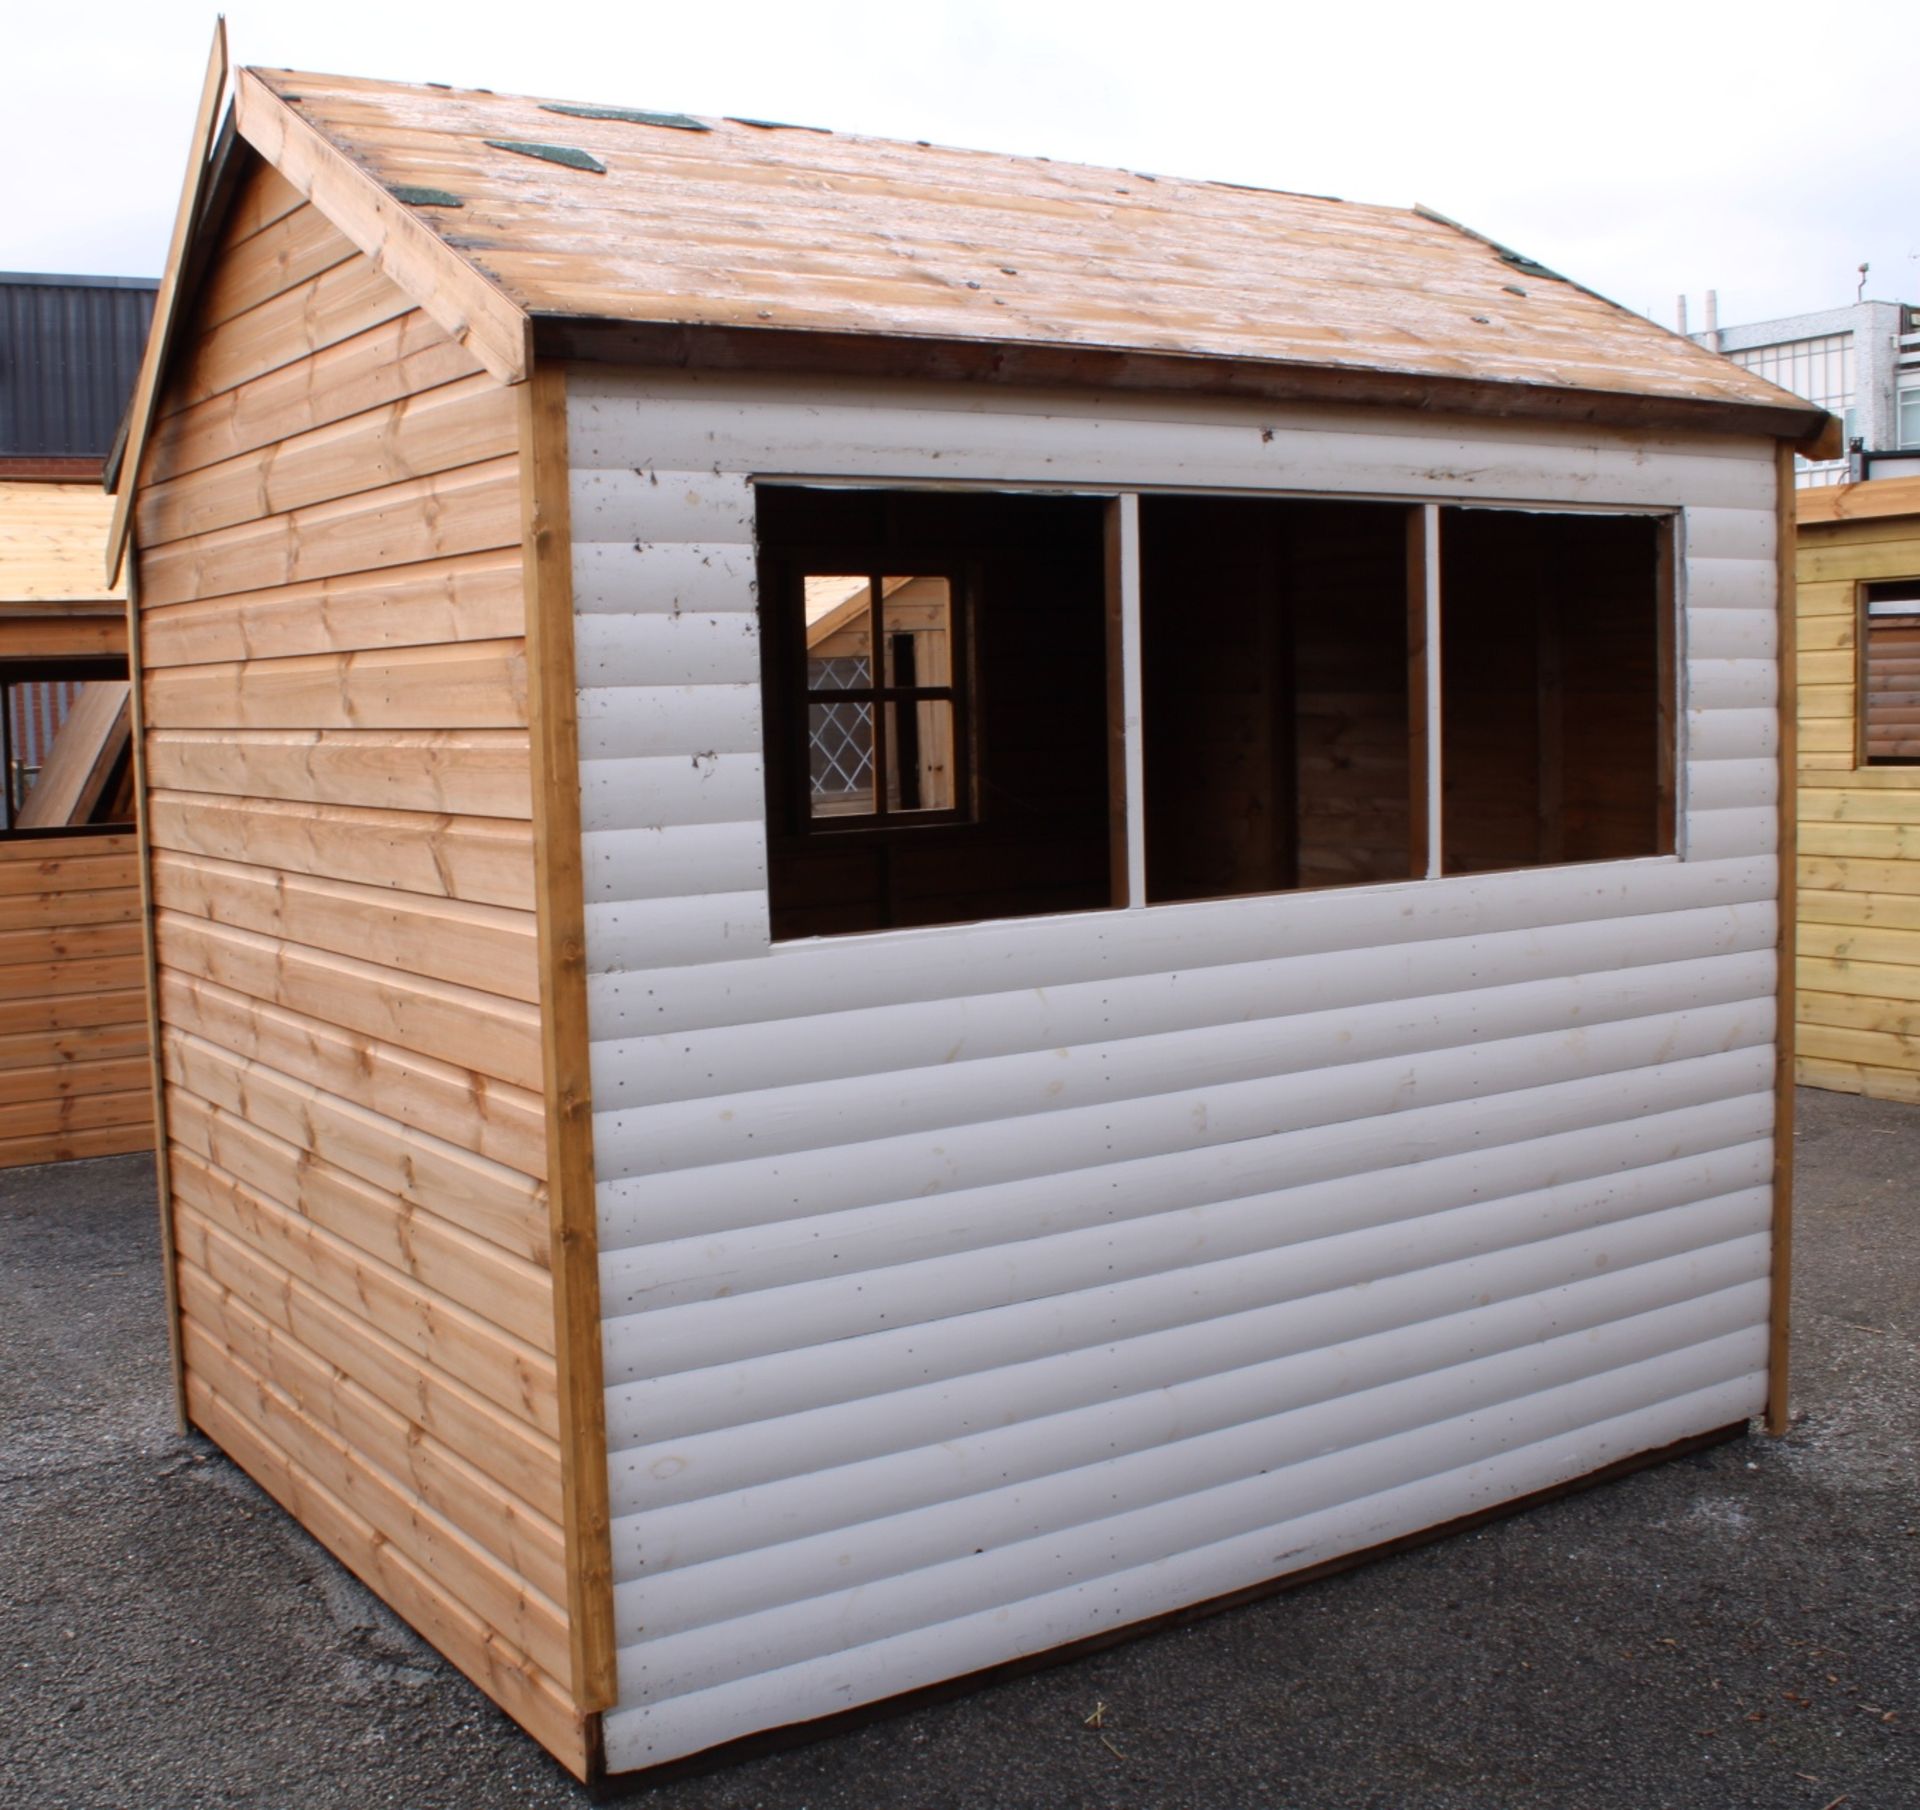 8x6 superior height apex shed, Standard 16mm Nominal Cladding RRP£1,006 - Image 4 of 4